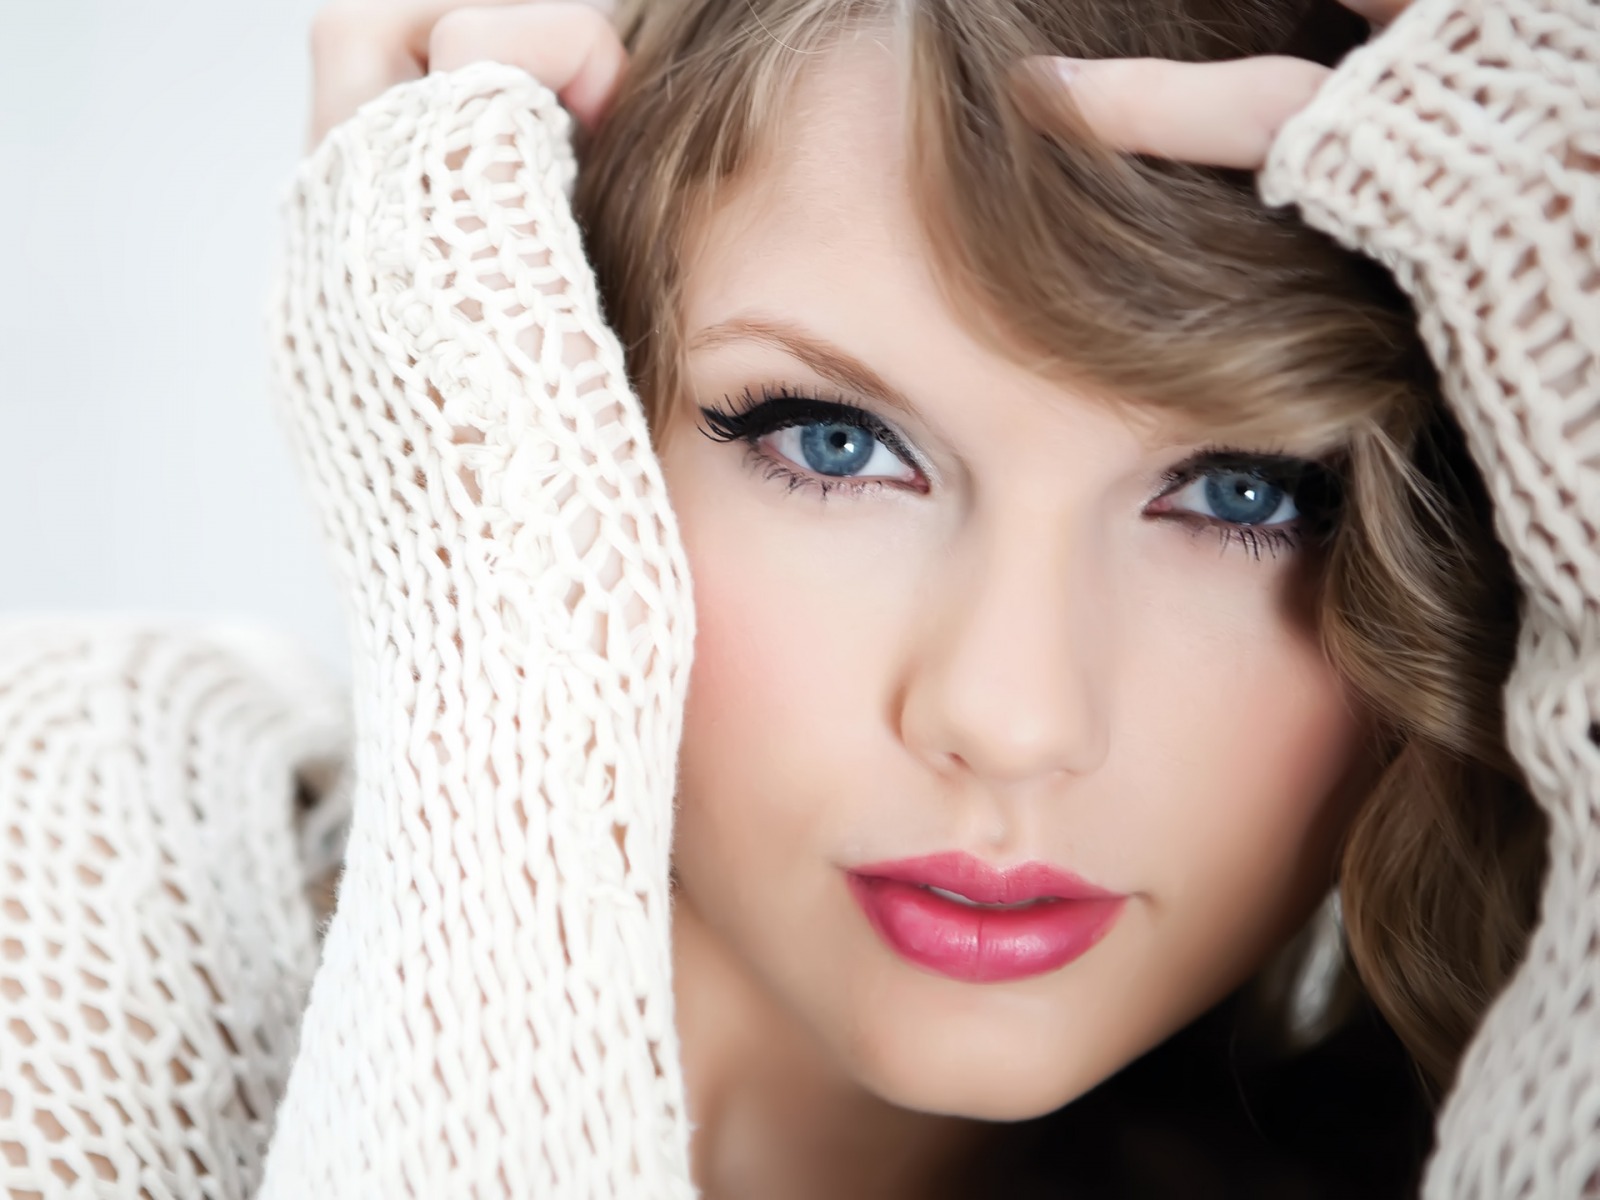 Cute Taylor Swift Image 07 - www.walldes-download.com